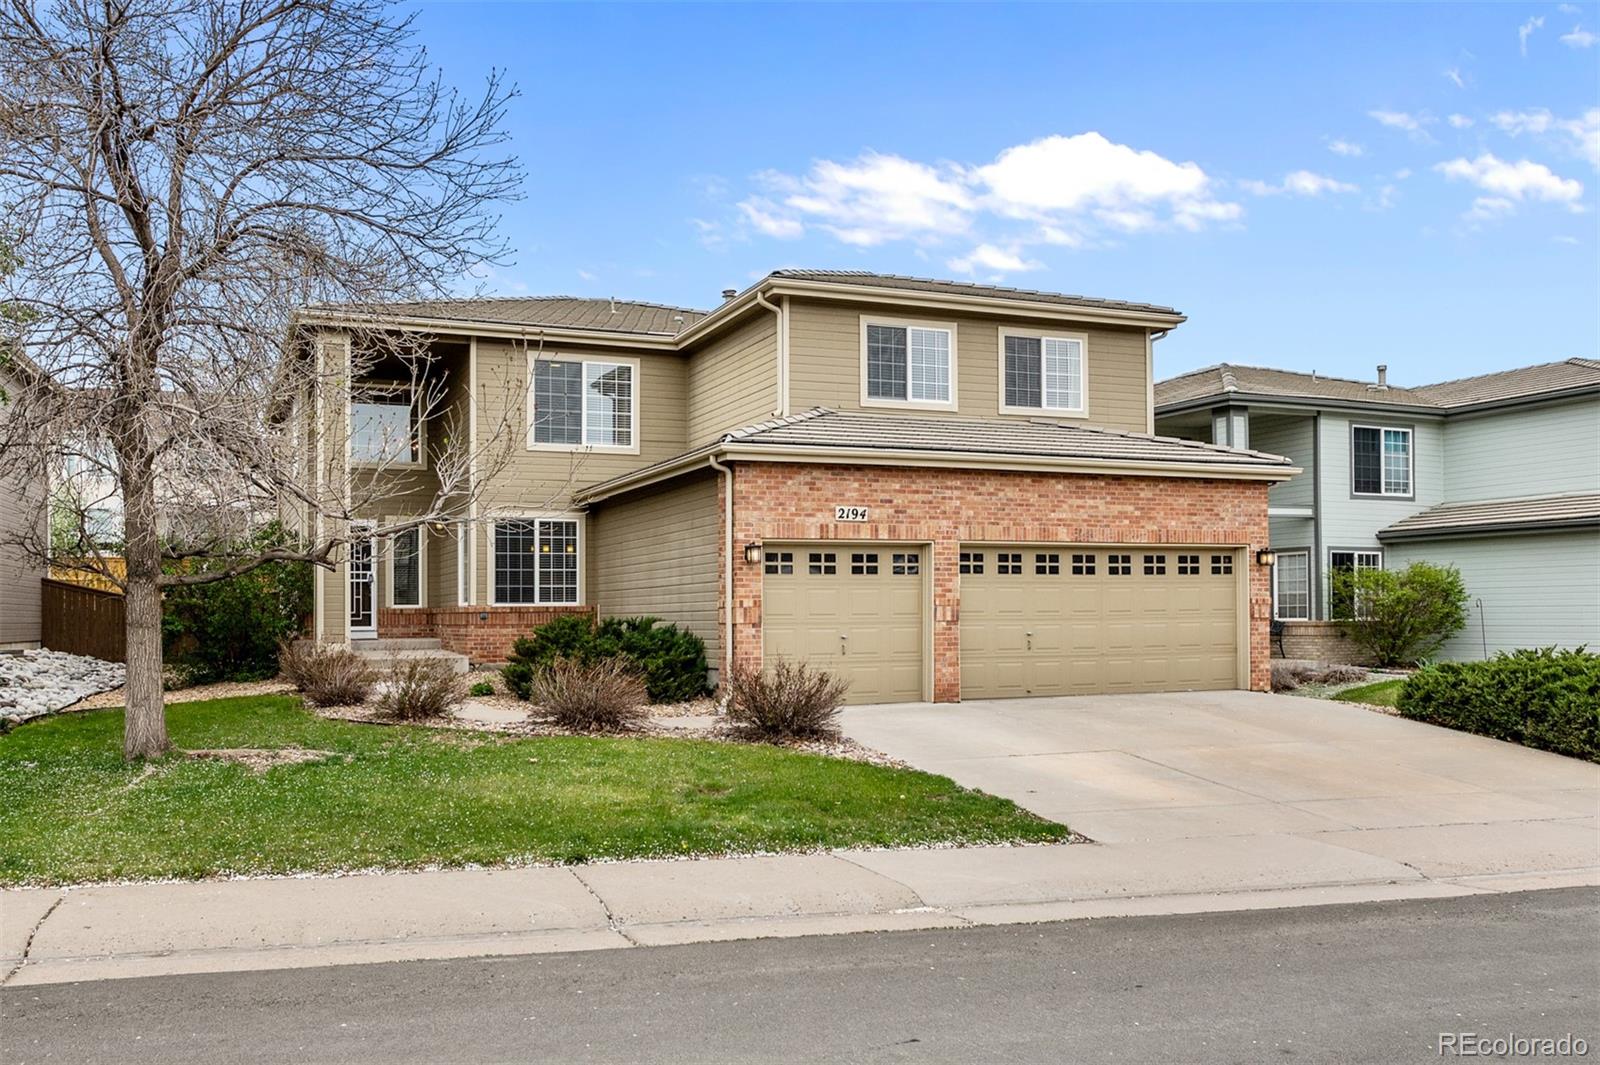 2194 Cactus Bluff Avenue, Highlands Ranch, CO 80129 - MLS#: 9041079